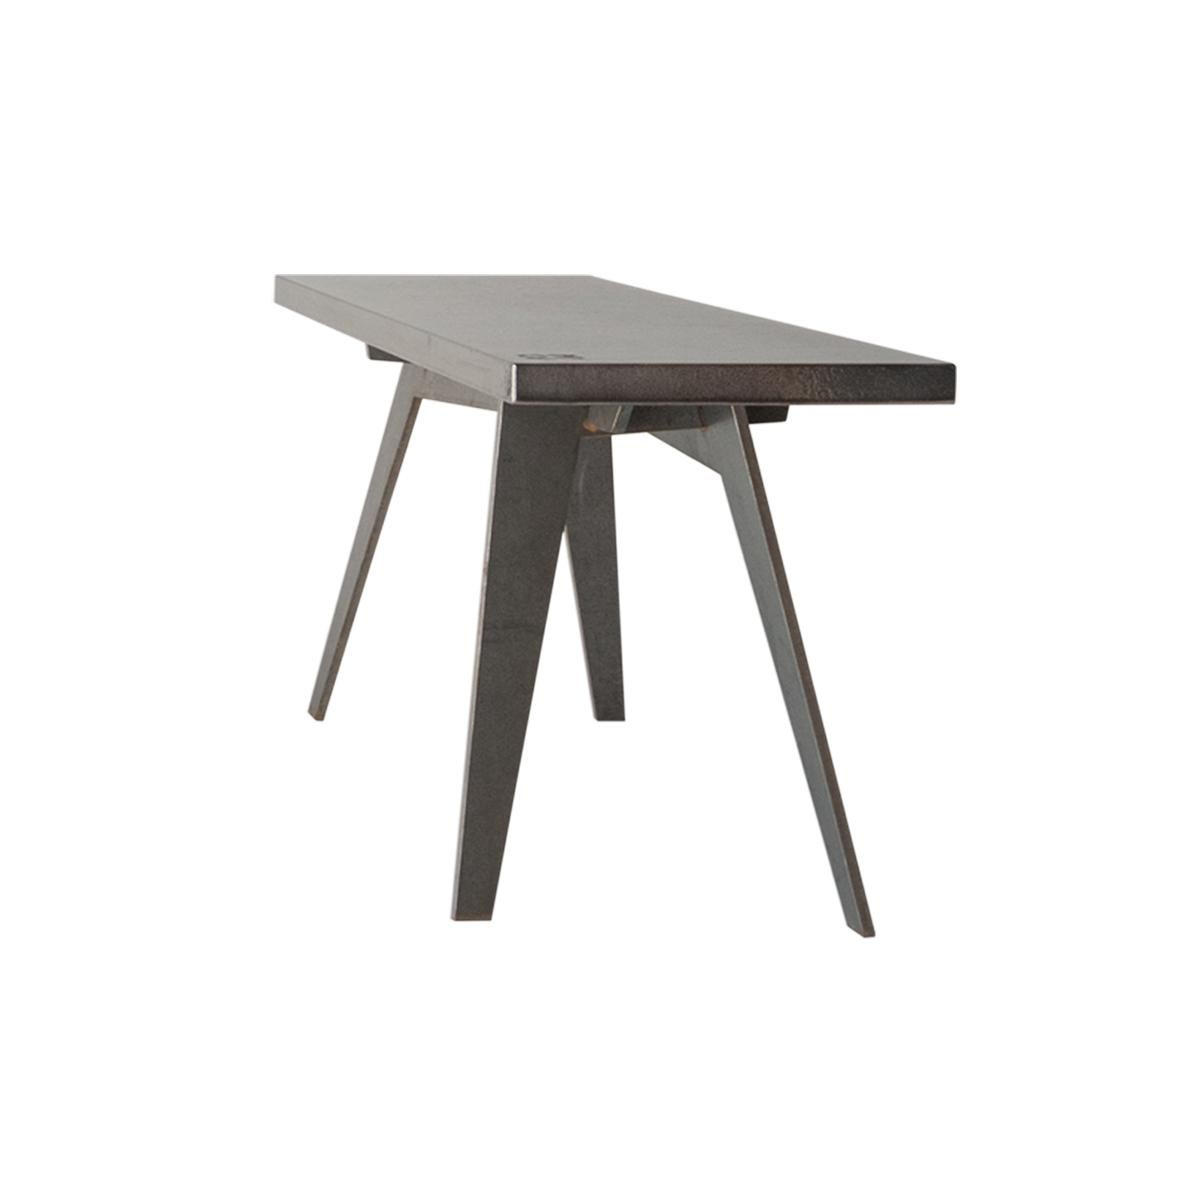 Modern Outdoor Bench in Etna Lava Stone and Steel, Venturae V4, Filodifumo For Sale